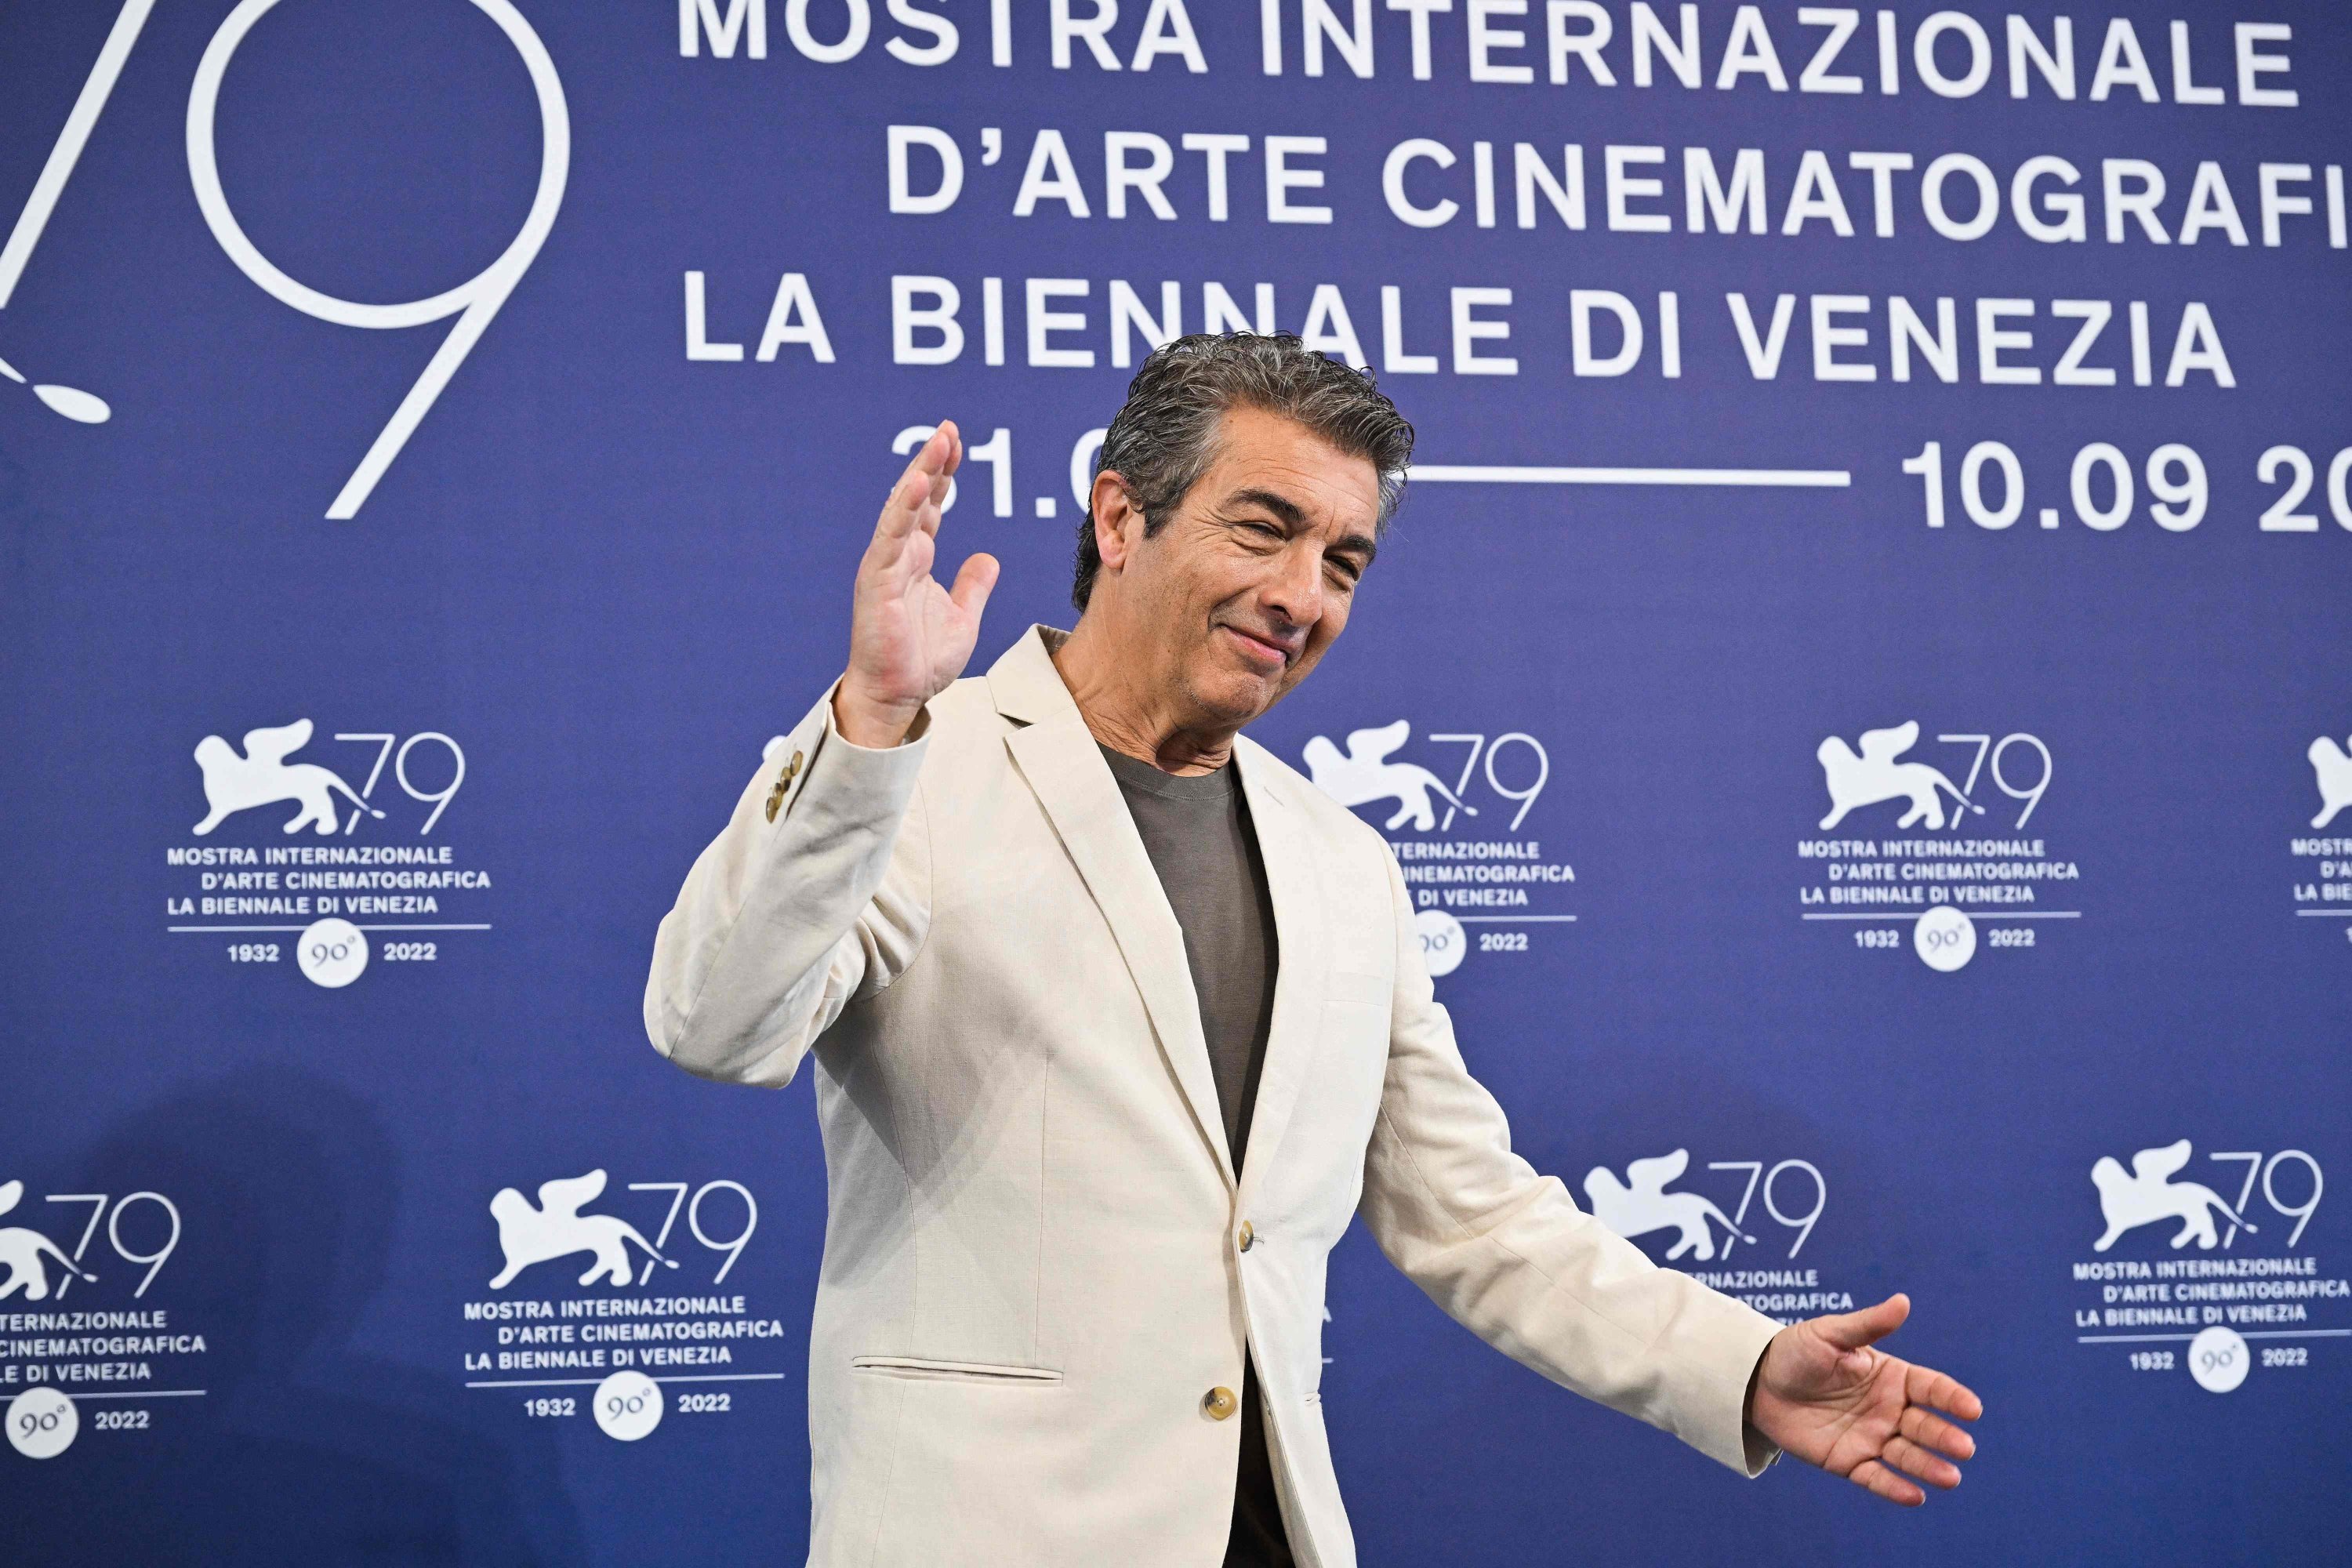 Argentine actor Ricardo Darin poses on Sept. 3, 2022, during a photocall for the film "Argentina, 1985" presented in the Venezia 79 competition as part of the 79th Venice International Film Festival at Lido di Venezia in Venice, Italy. (AFP Photo)